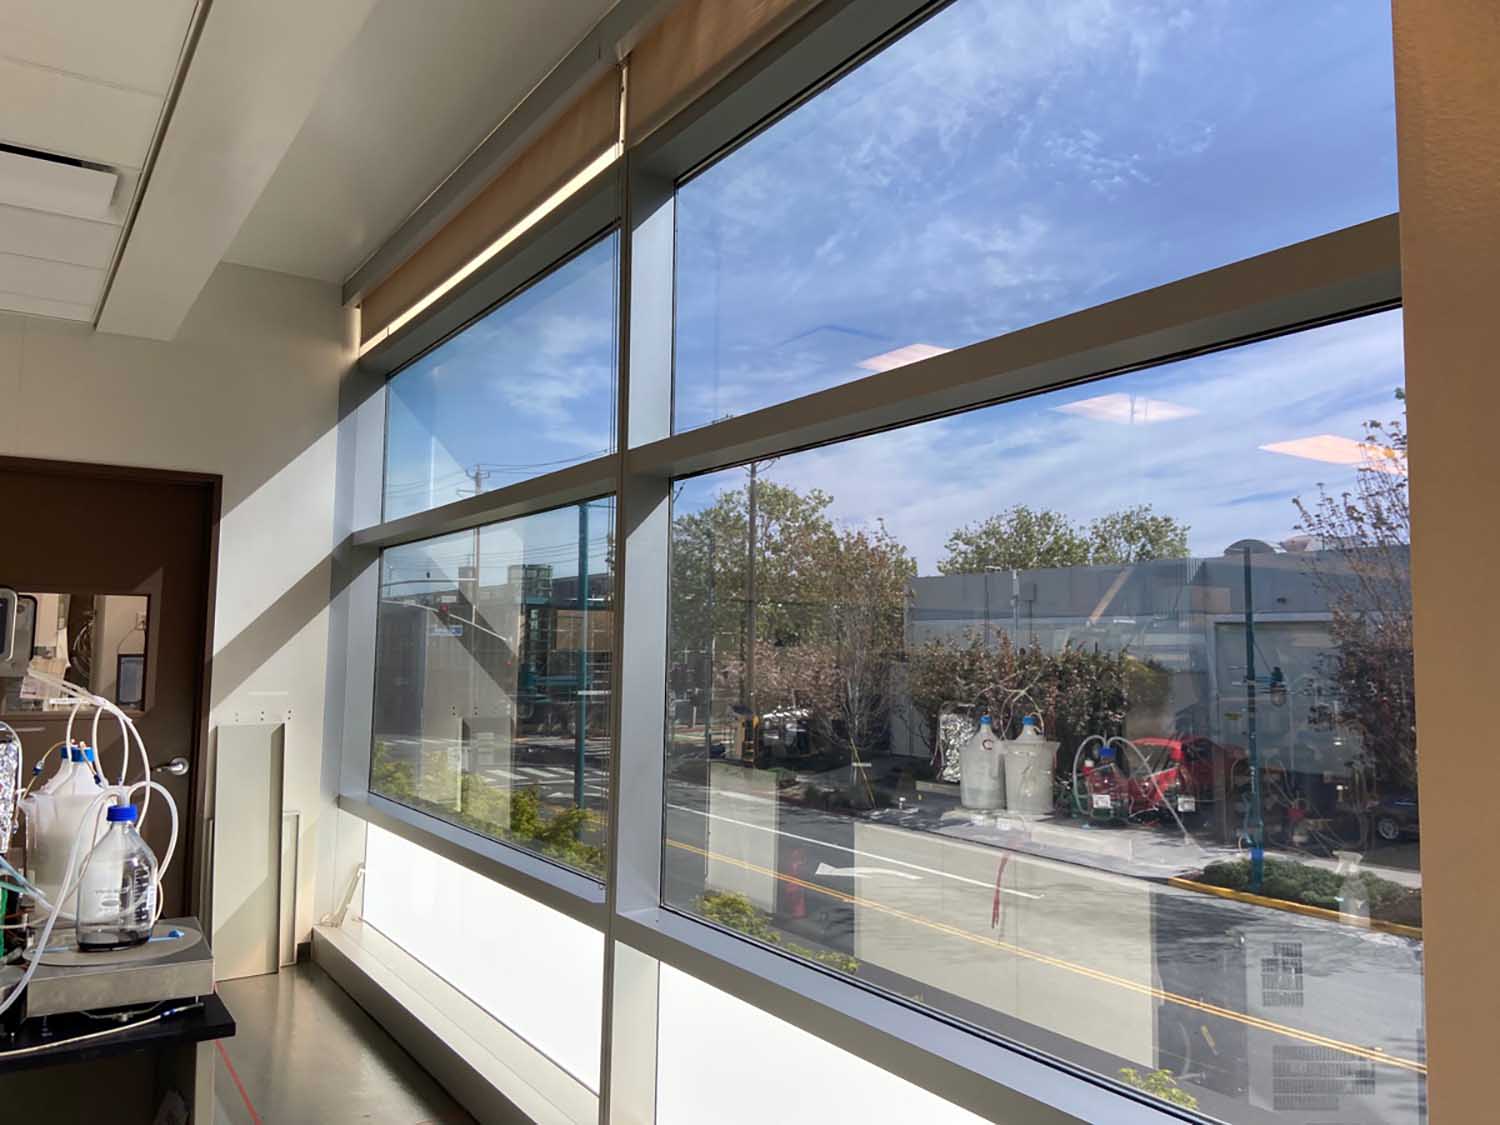 3M Window Film creates a better workplace for Emeryville workers. Get a free estimate for your business from ClimatePro.